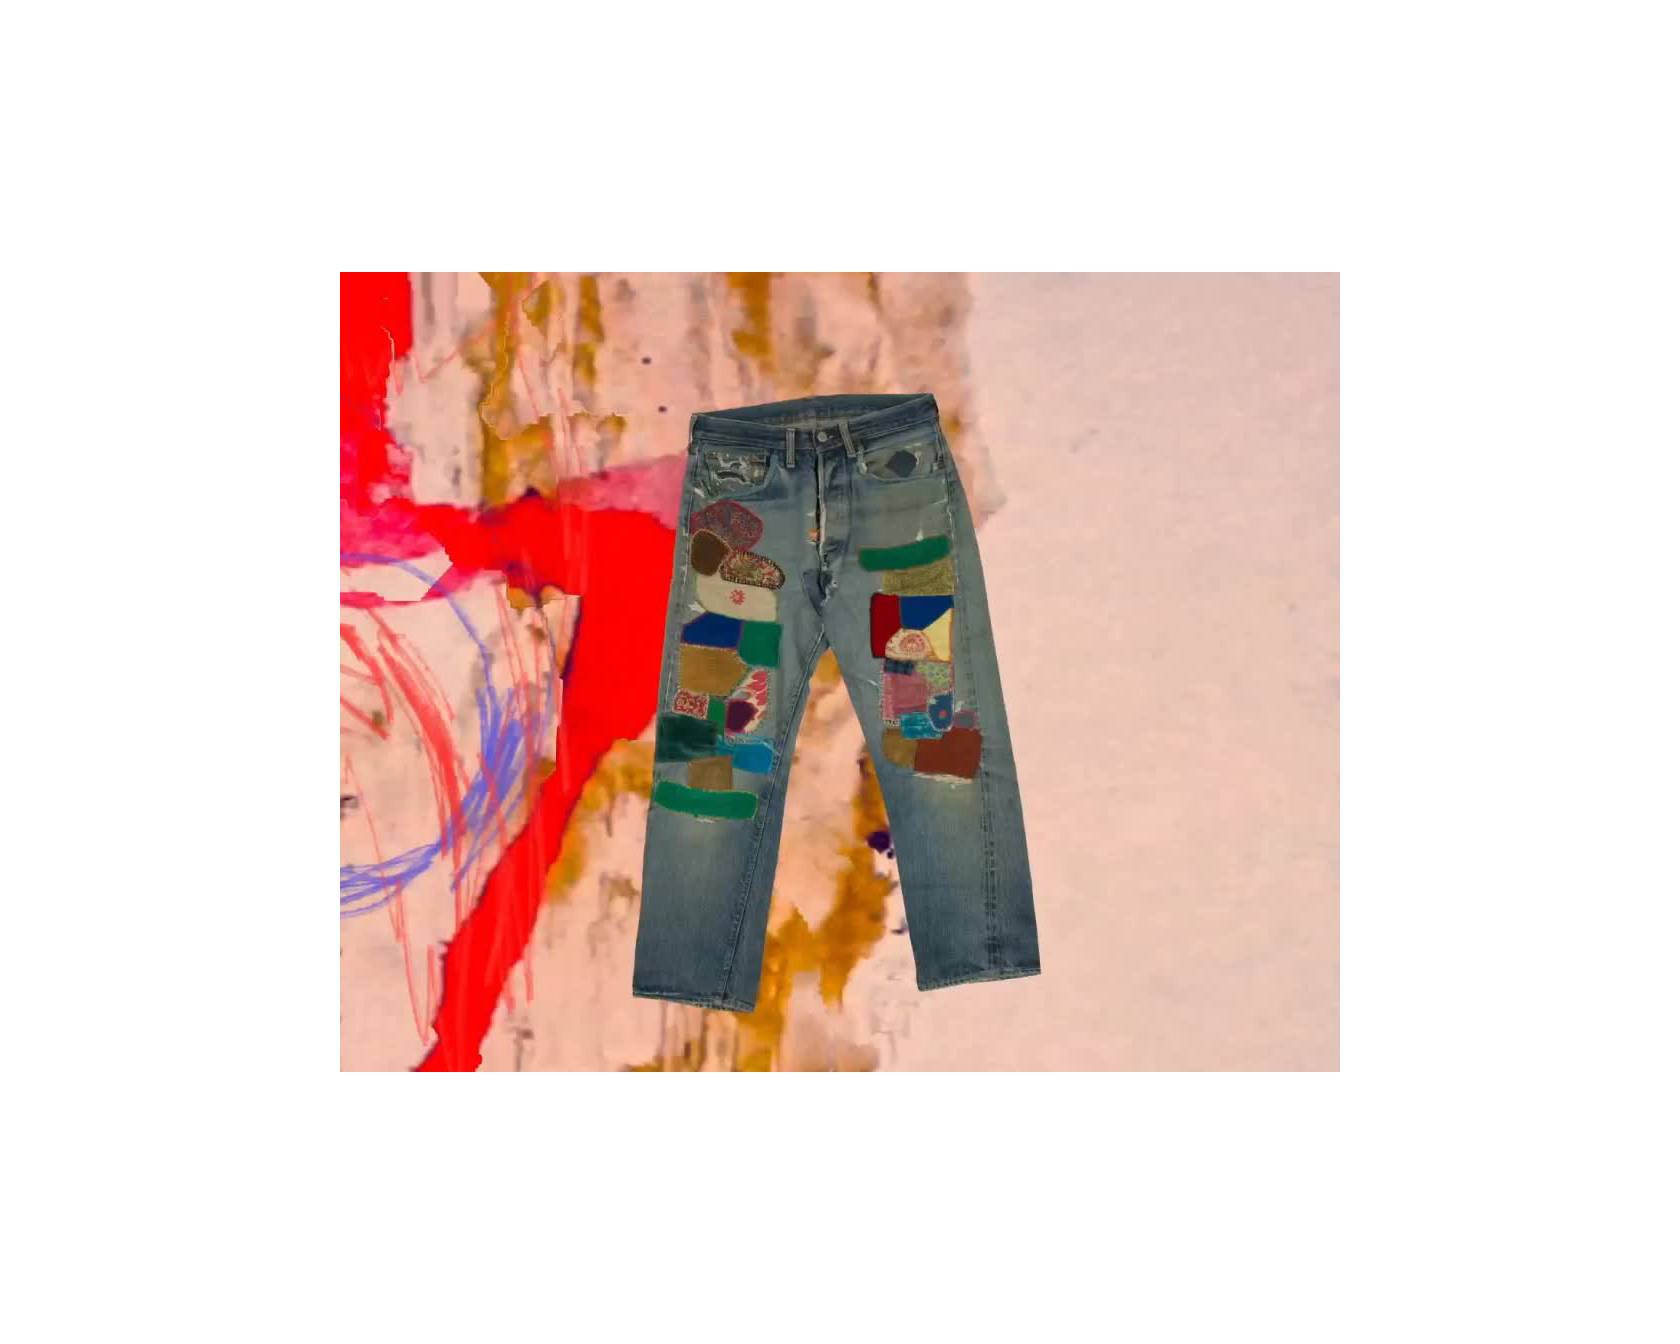 Video of customized 501 jeans with fun design and patchwork, and people wearing 501 jeans.